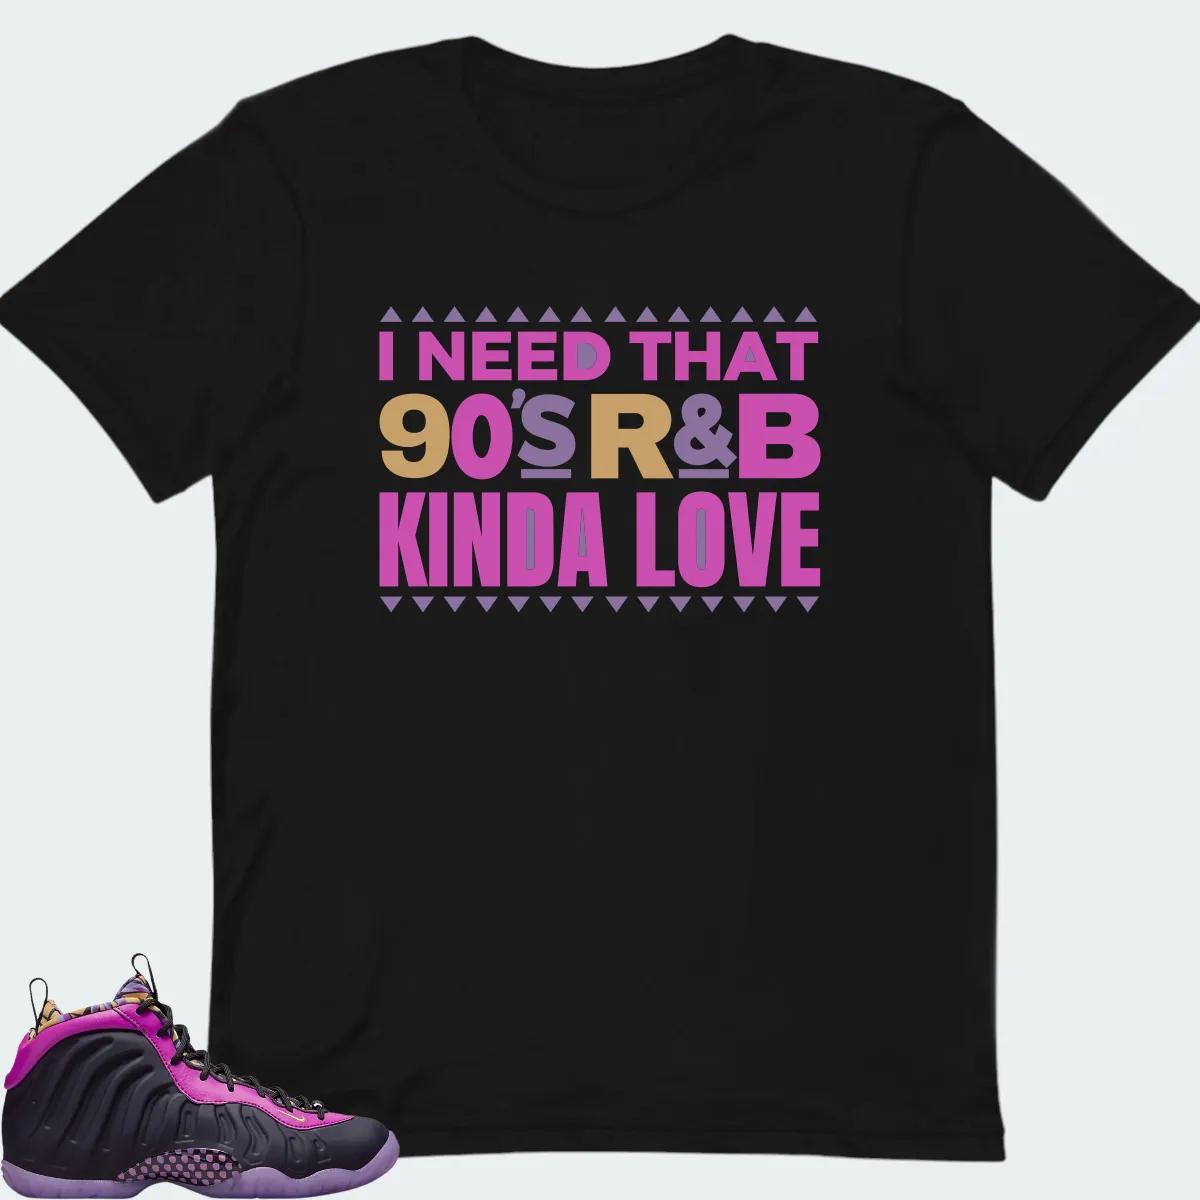 Nike Little Posite One Cave Purple (GS) Sneaker Matching T-Shirt(I Need That 90s R&B Kinda Love)